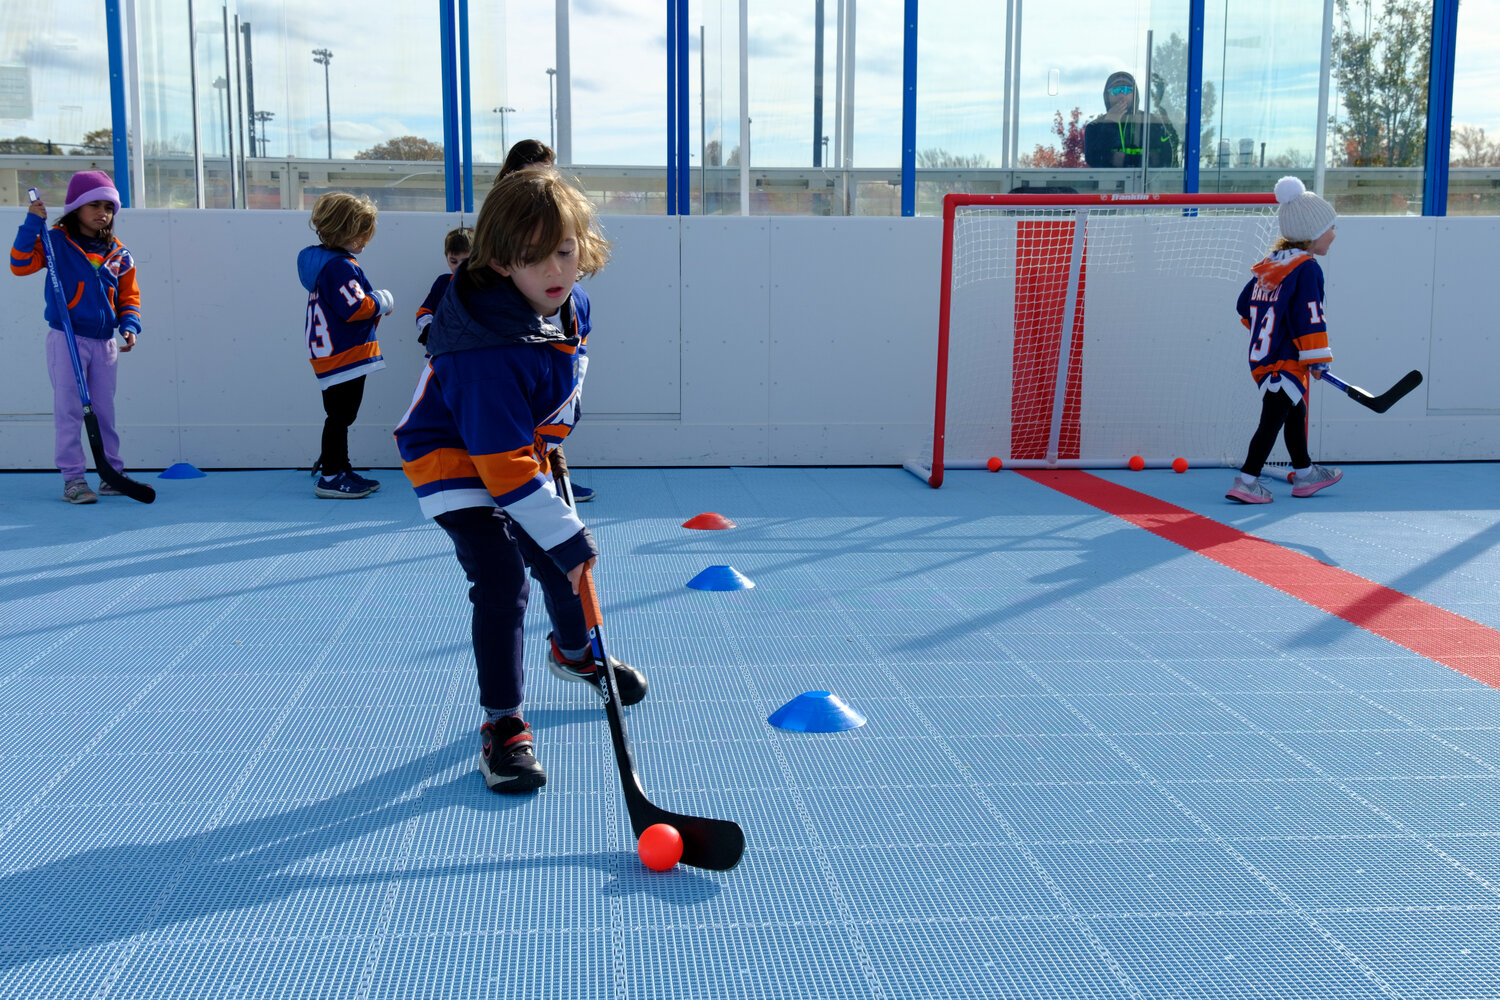 Austin Grefig, 7, had a blast putting his skills to the test on the rink outside of the main facility. The Northwell Health Ice Center is an official training location for the Islanders, and a spot where many community events take place throughout the year.